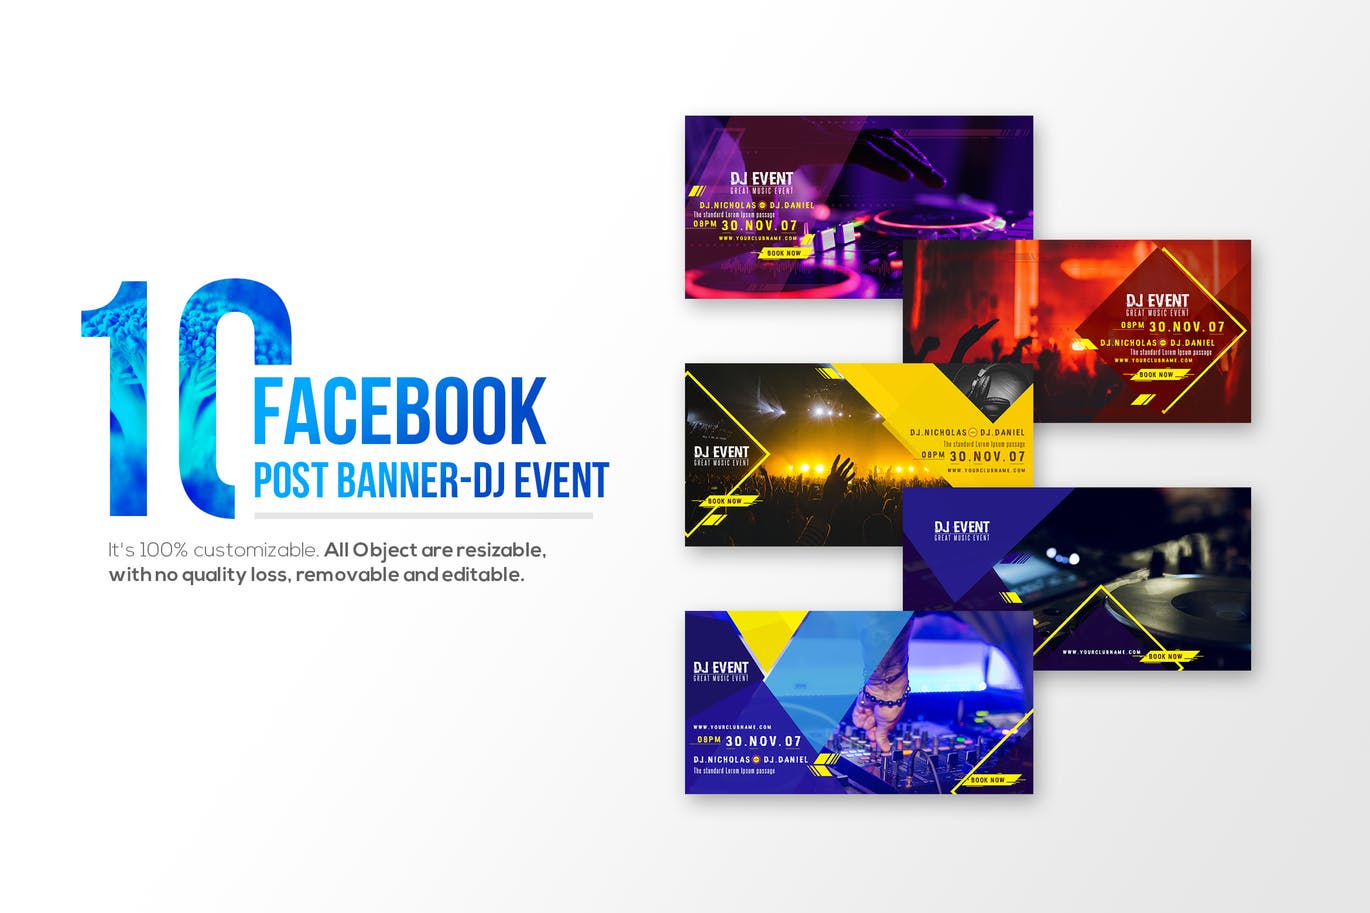 10-Facebook Post banners-DJ Event by Wutip on Envato Elements